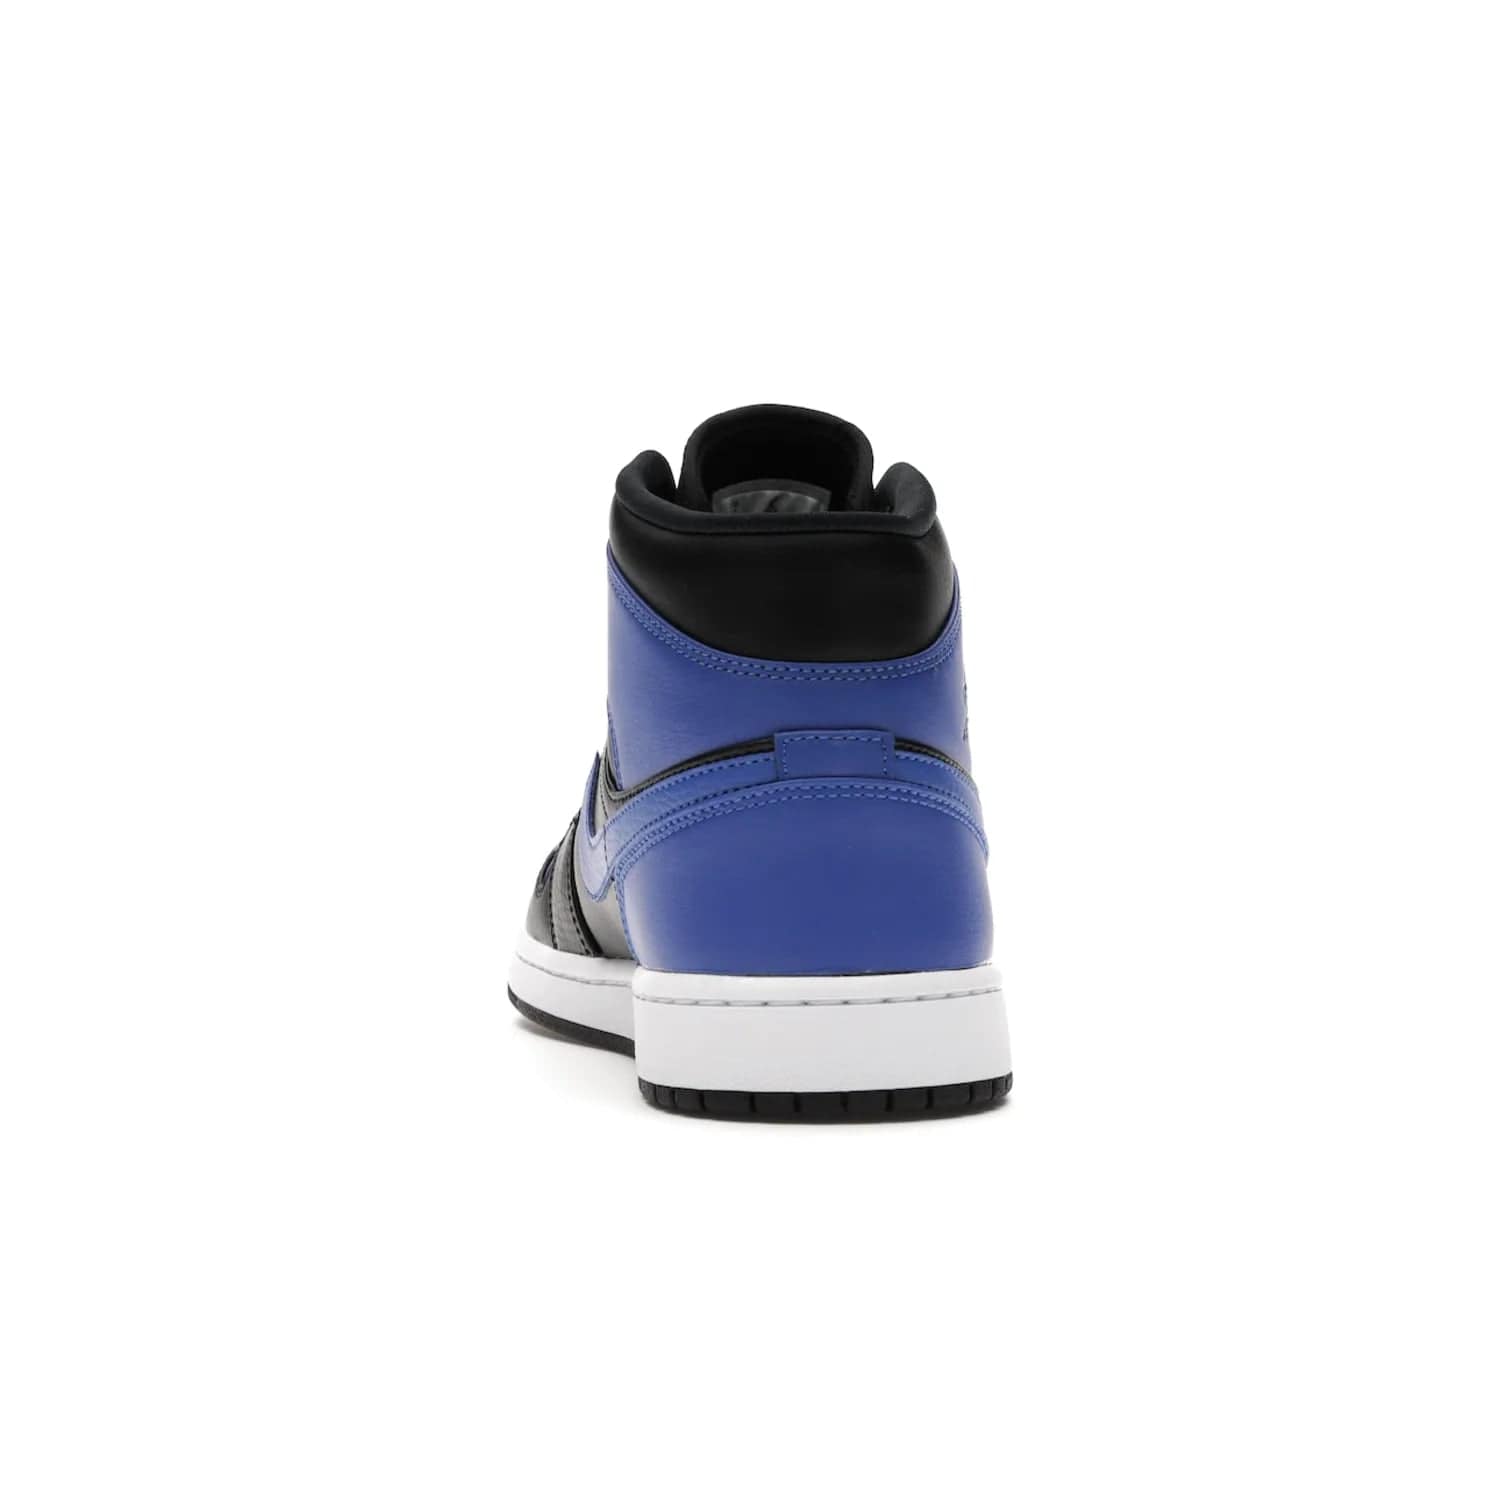 Jordan 1 Mid Hyper Royal Tumbled Leather - Image 27 - Only at www.BallersClubKickz.com - Iconic colorway of the Air Jordan 1 Mid Black Royal Tumbled Leather. Features a black tumbled leather upper, royal blue leather overlays, white midsole & black rubber outsole. Released December 2020. Adds premium style to any collection.